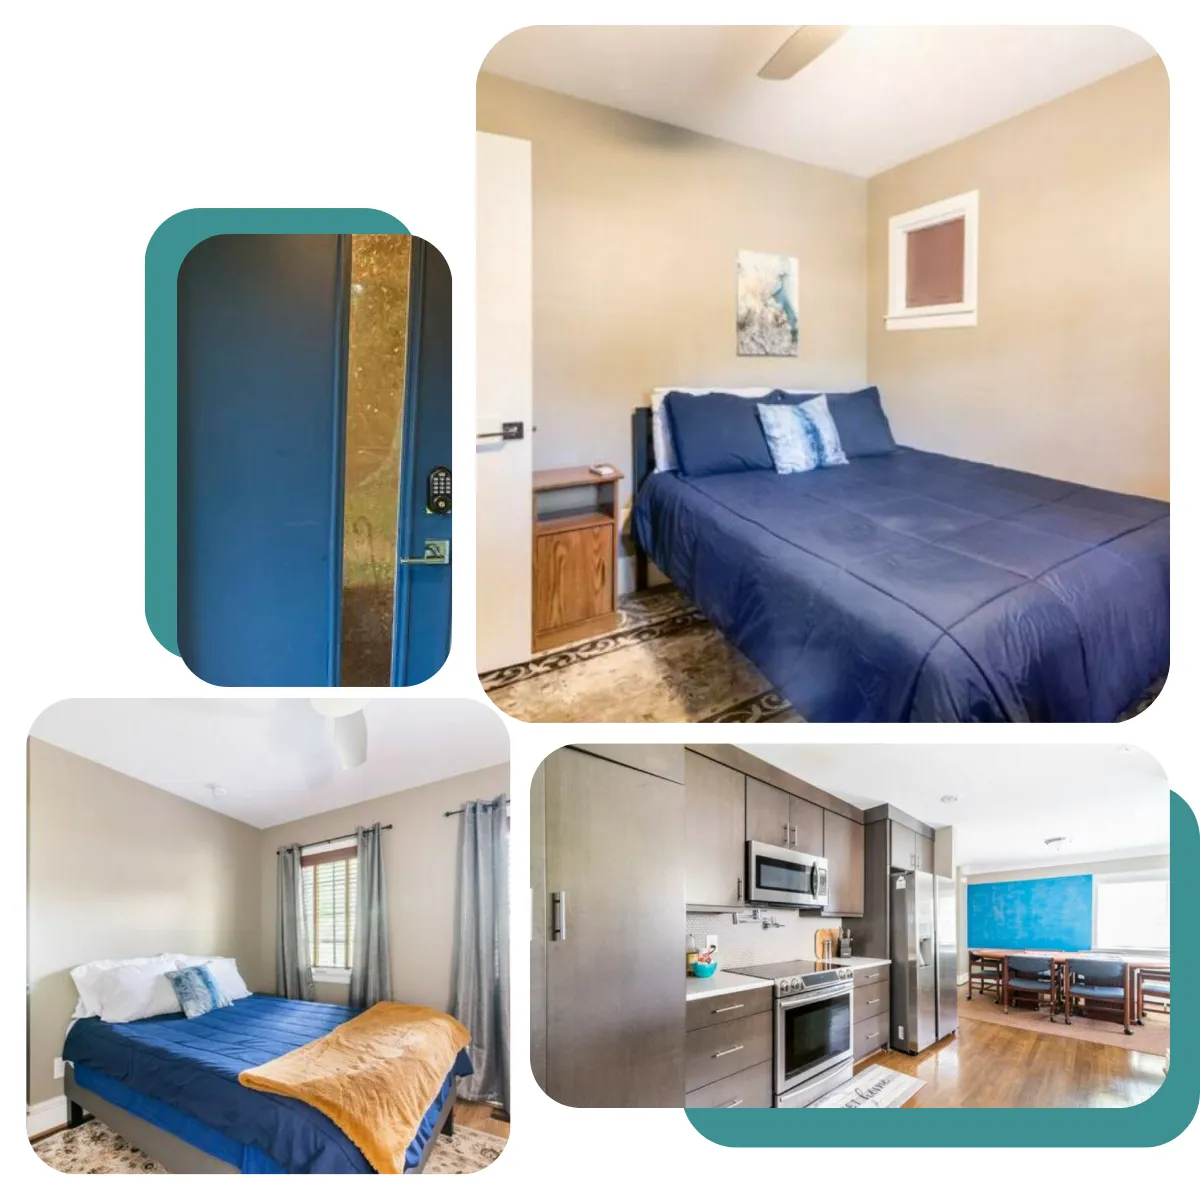 In Uptown Cozy Rental, both bedrooms have comfy Queen beds for a restful night, whether for work or play.